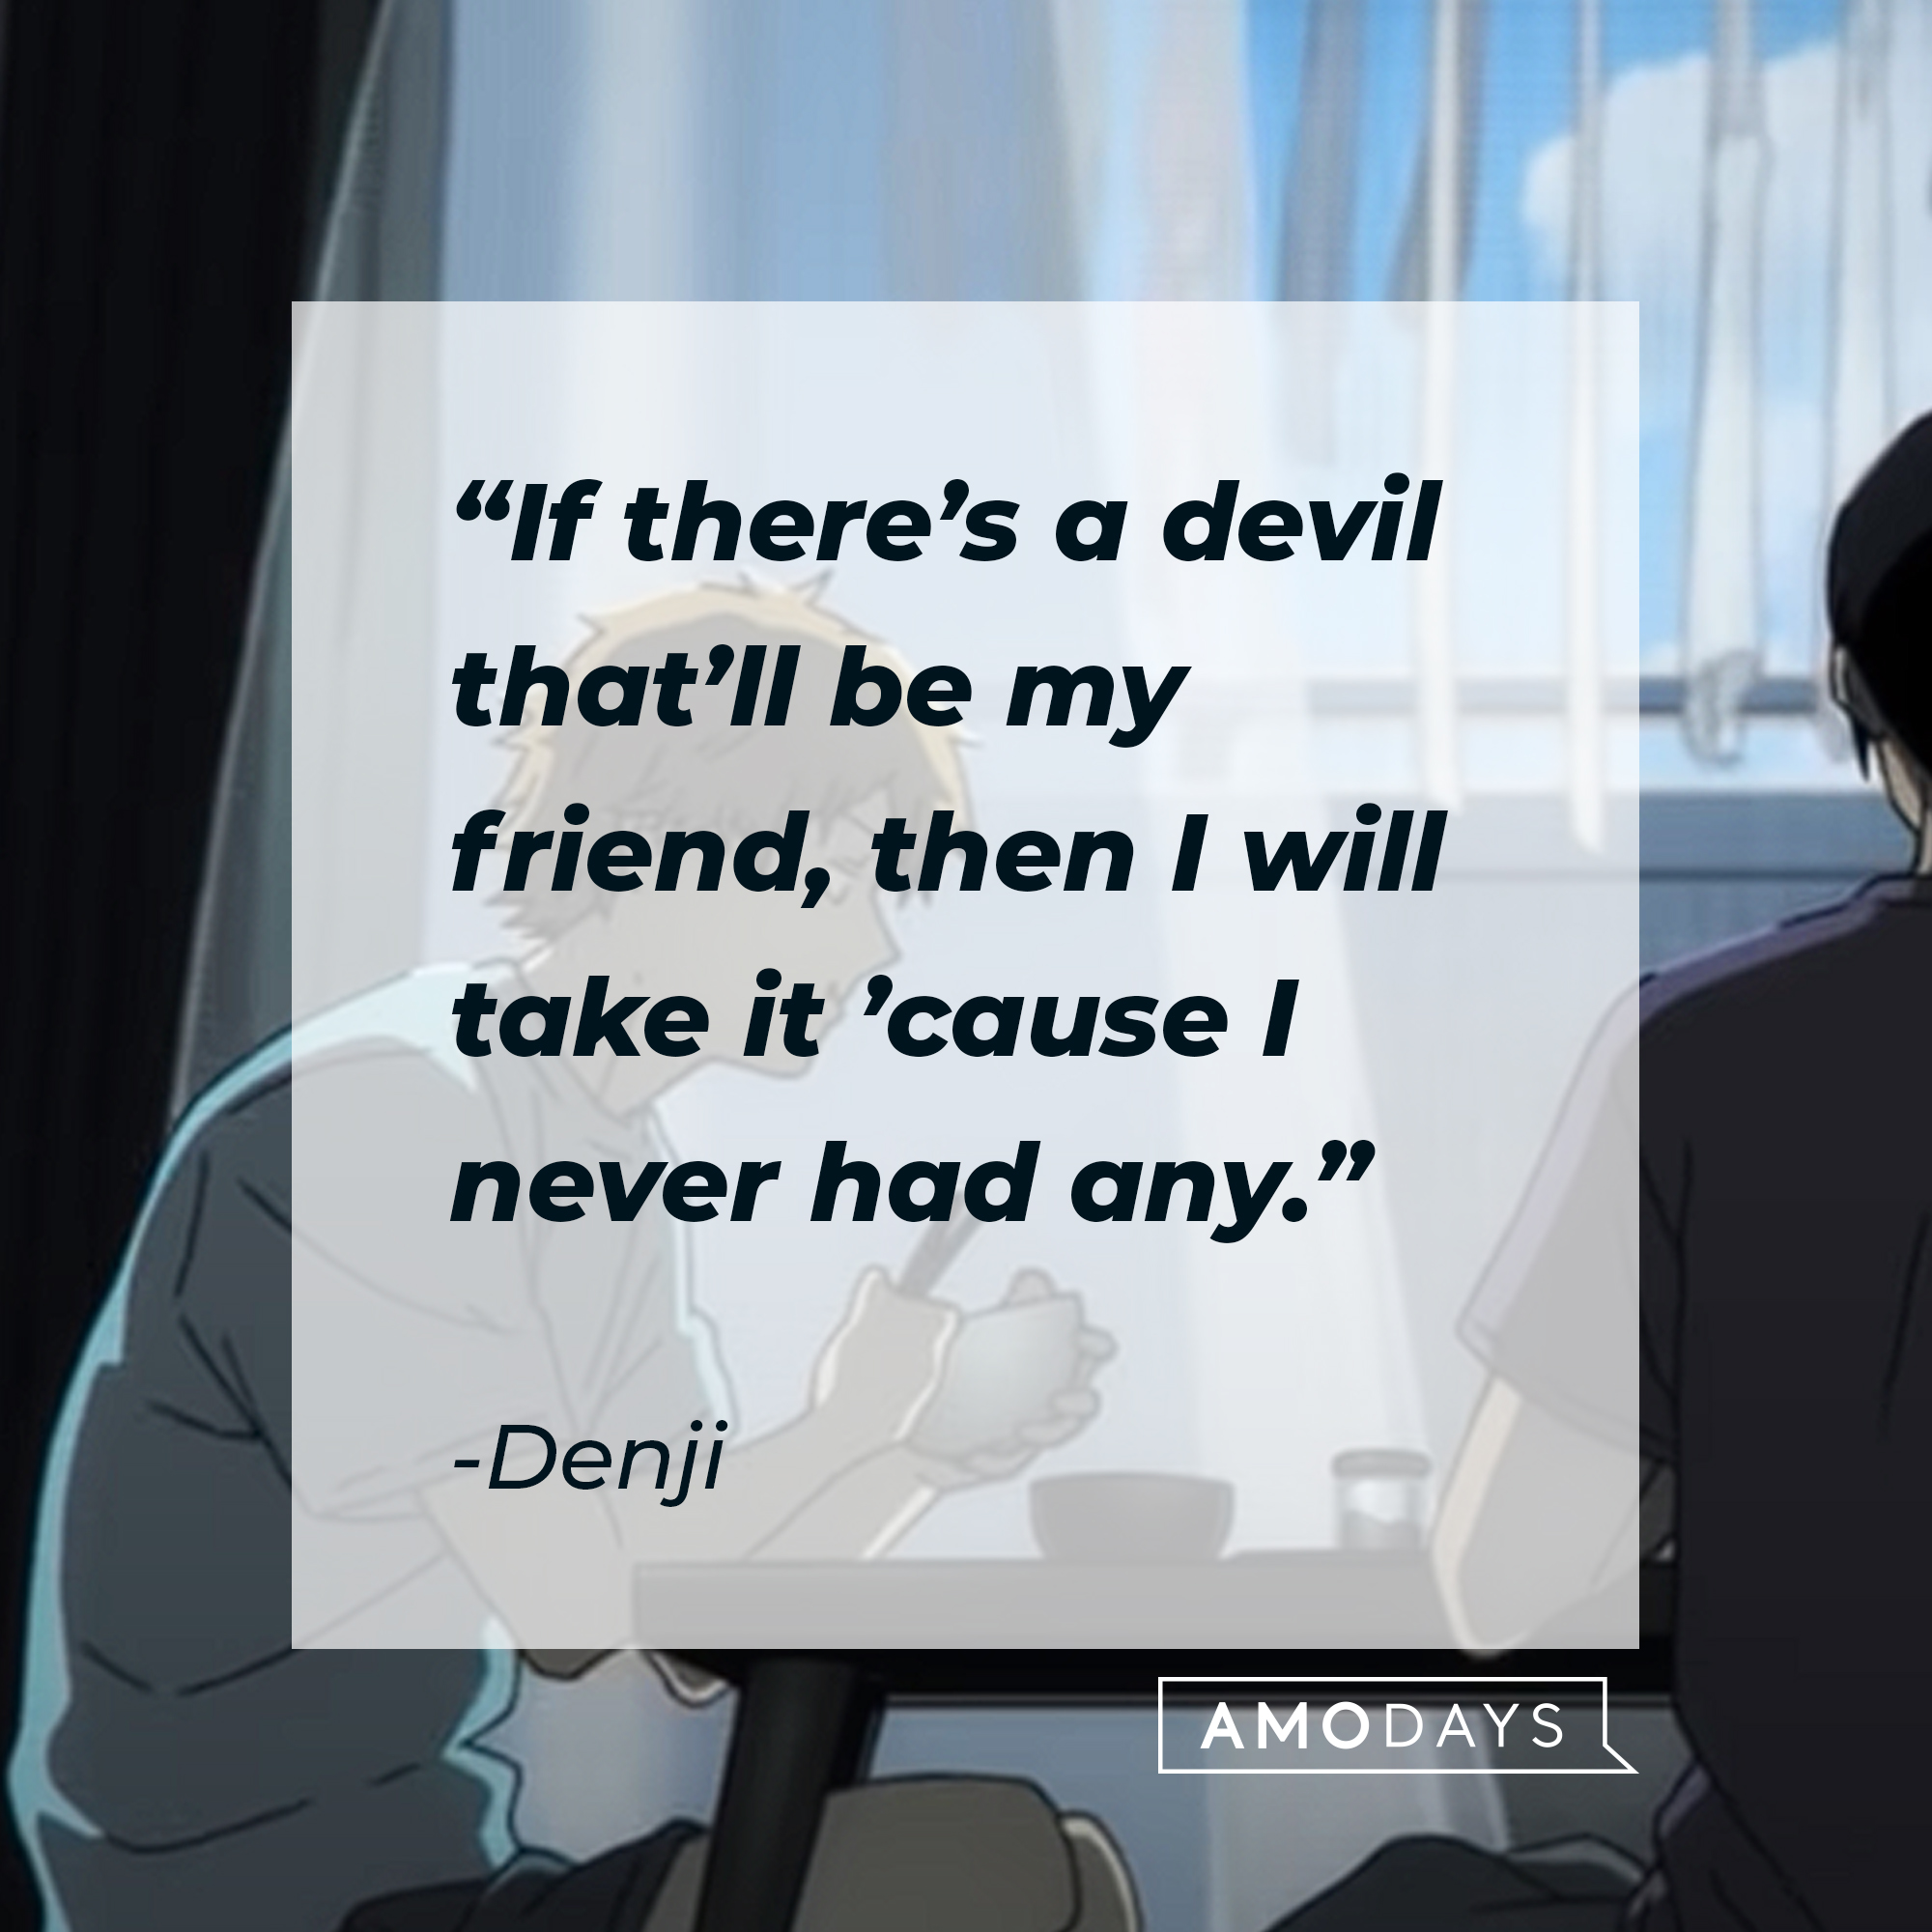 An image of Denji with his quote: “If there’s a devil that’ll be my friend, then I will take it ’cause I never had any.” | Source: youtube.com/CrunchyrollCollection